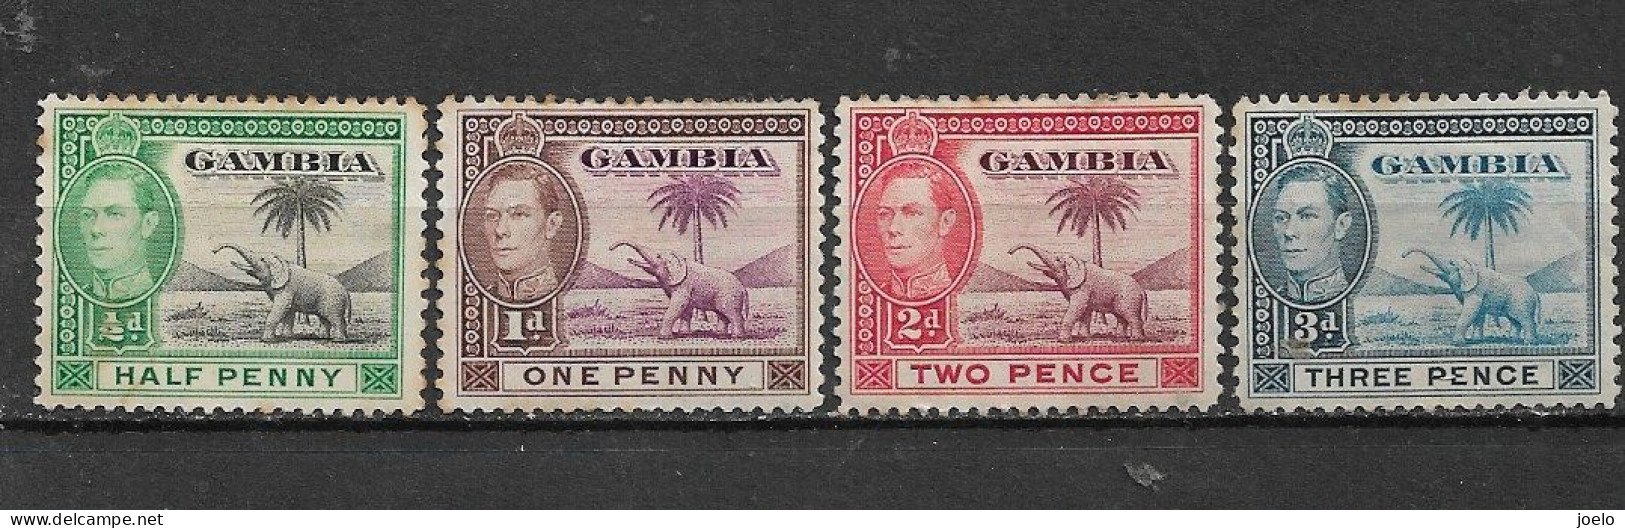 GAMBIA 1938 KGVl DEFINITIVES SHORT SELECTION MH - Gambie (...-1964)